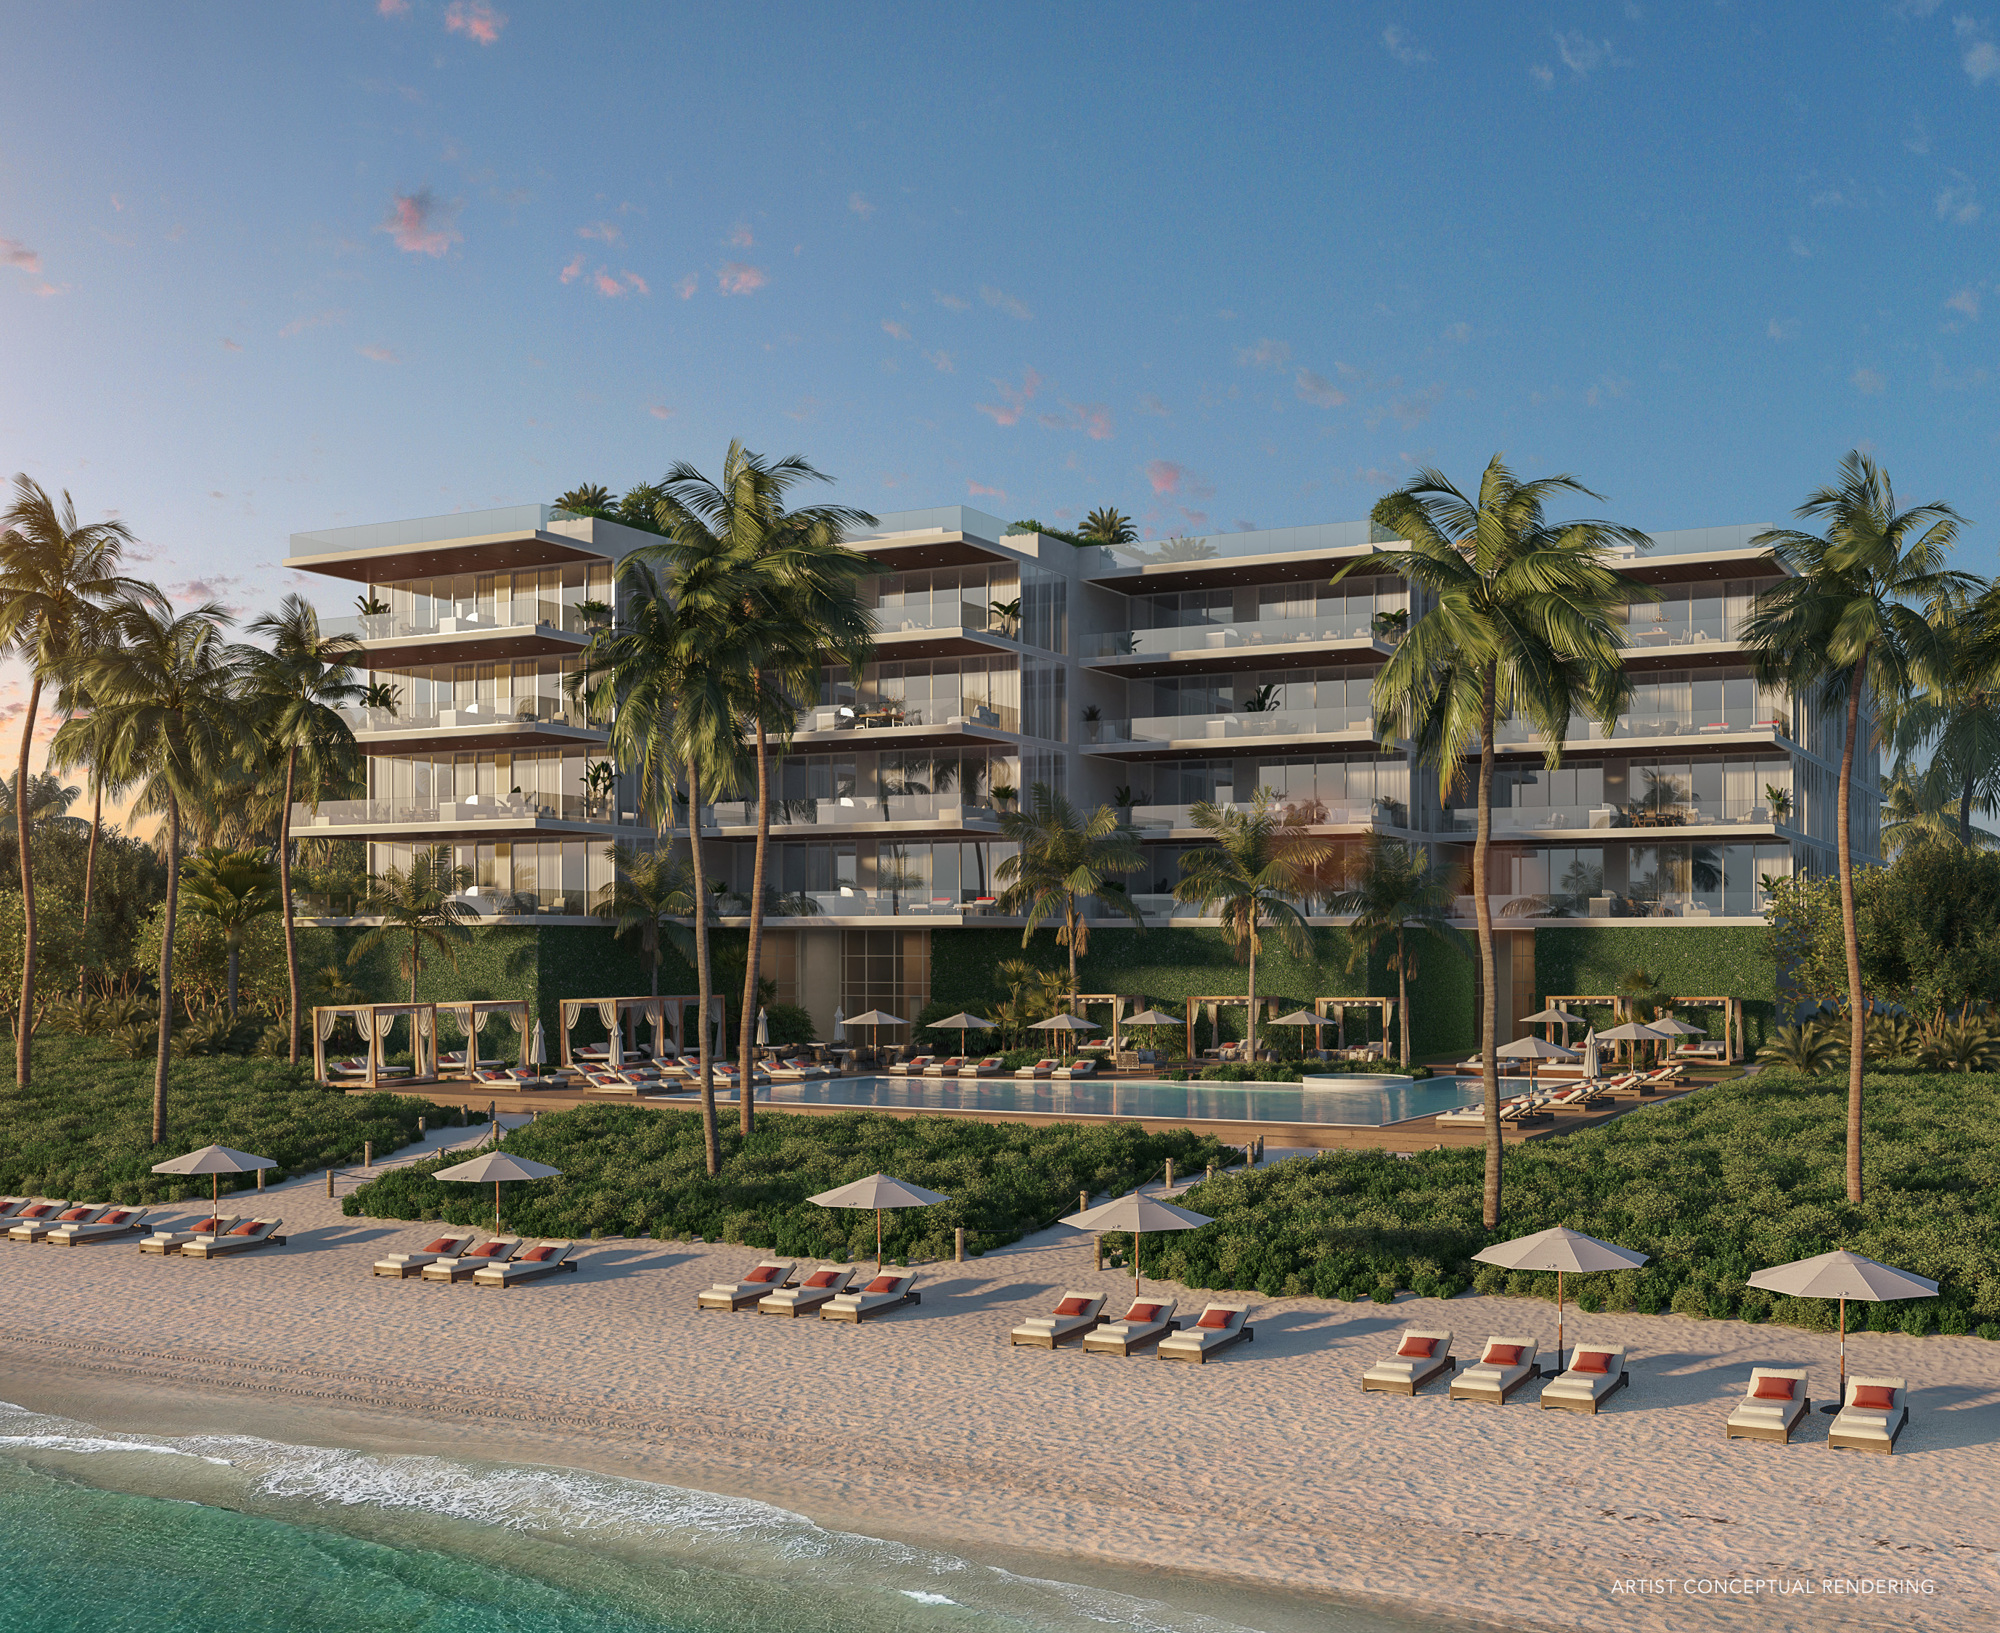 Sage Longboat Key Residences features 16 units with 12-foot ceilings, 8-foot entry doors, floor-to-ceiling windows and expansive private terraces. (Courtesy photo)